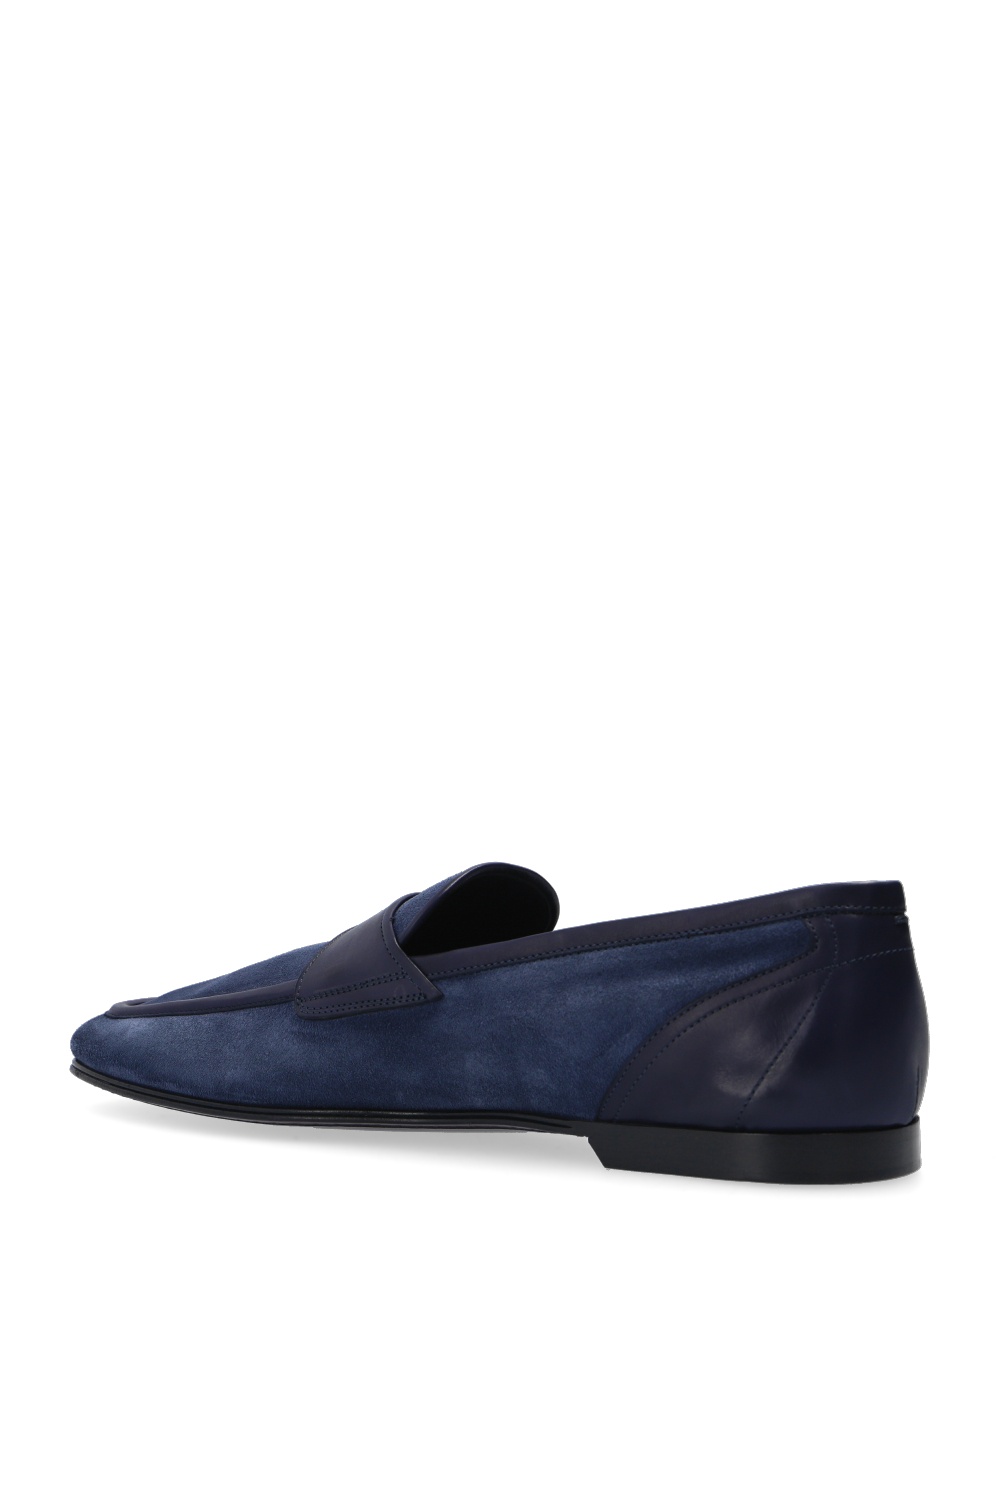 dolce patches & Gabbana ‘Erice’ loafers